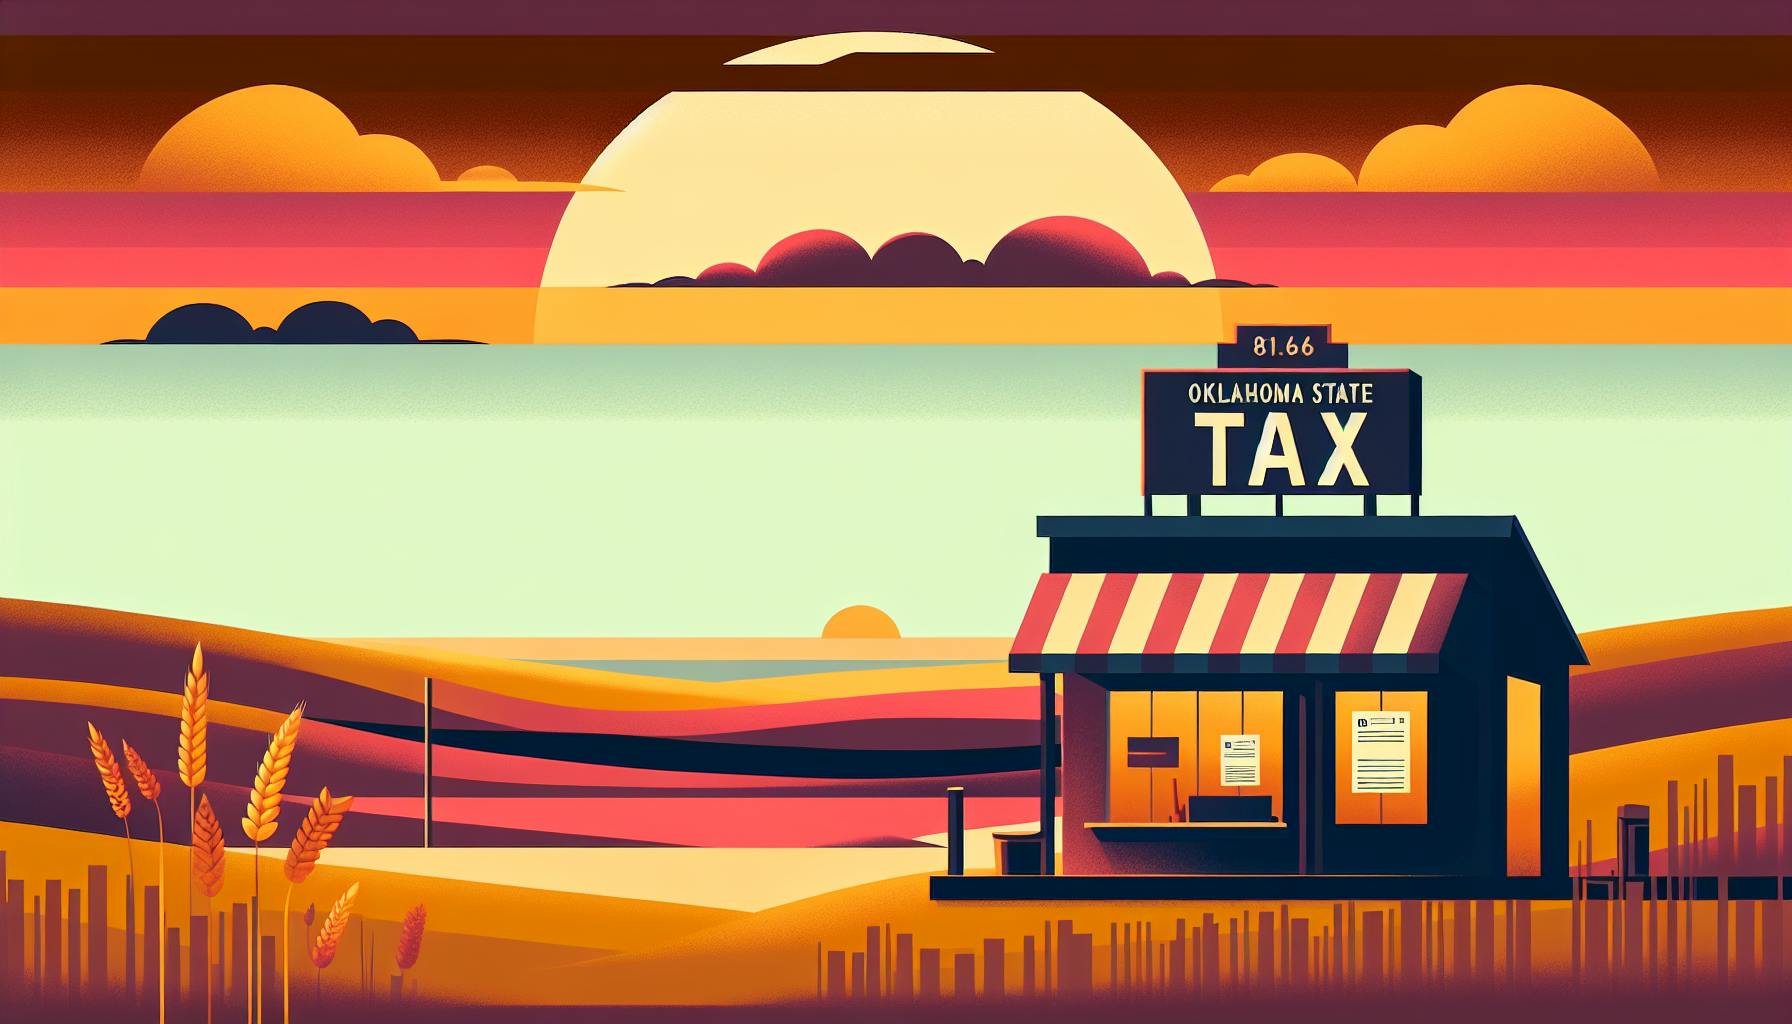 Oklahoma Tax Essentials: A Guide for Small Business Owners